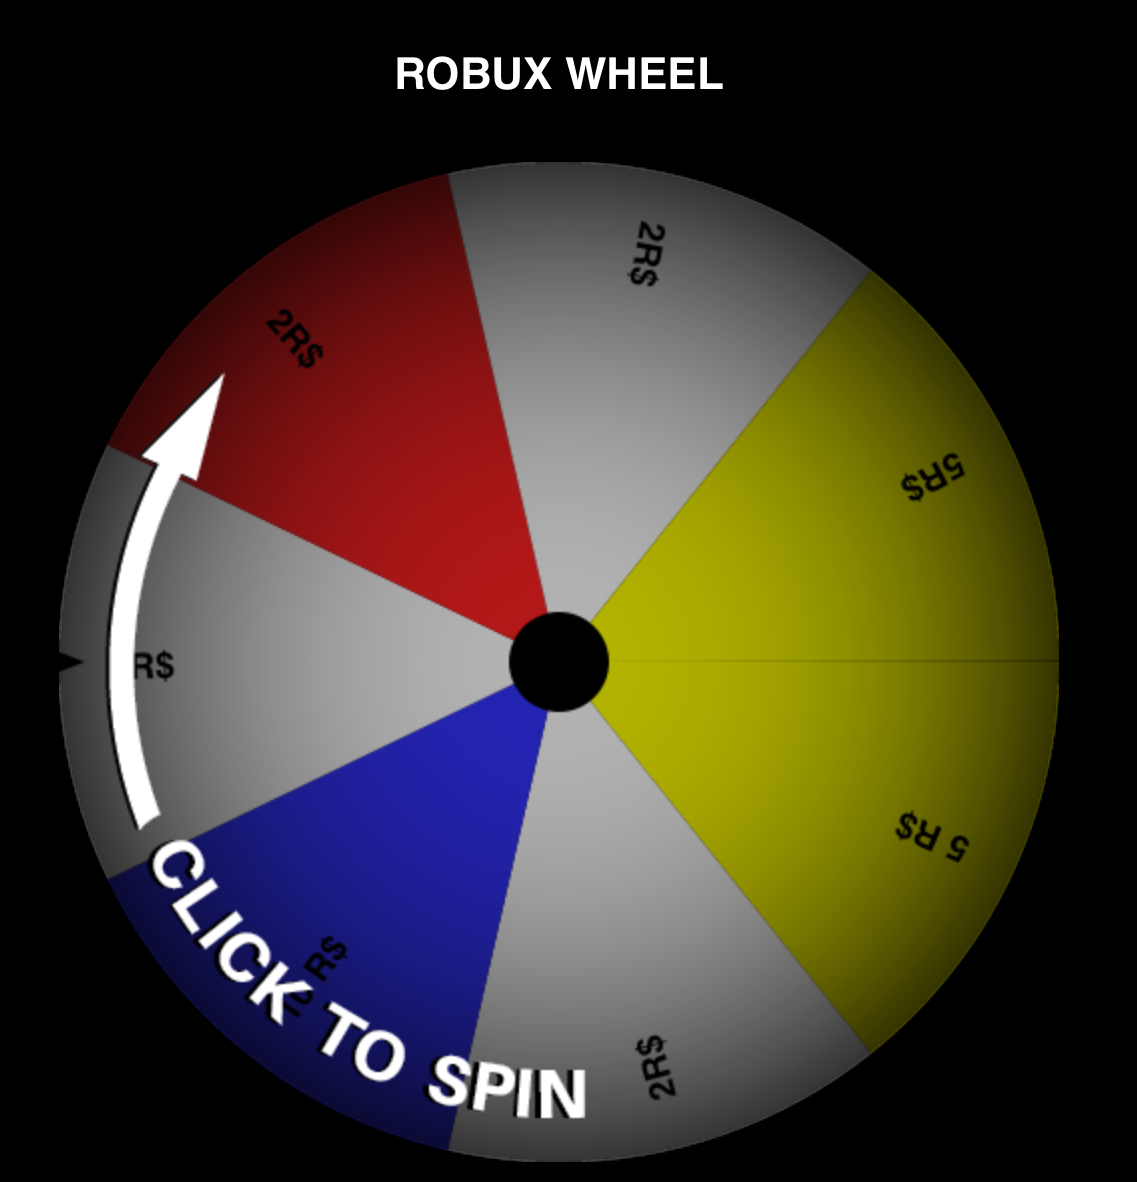 Adopt Me News On Twitter Behold The Robux Wheel To Have A Spin You Need To Like Retweet And Follow Weebkookie Only 1 Winner - spin the wheel roblox adopt me